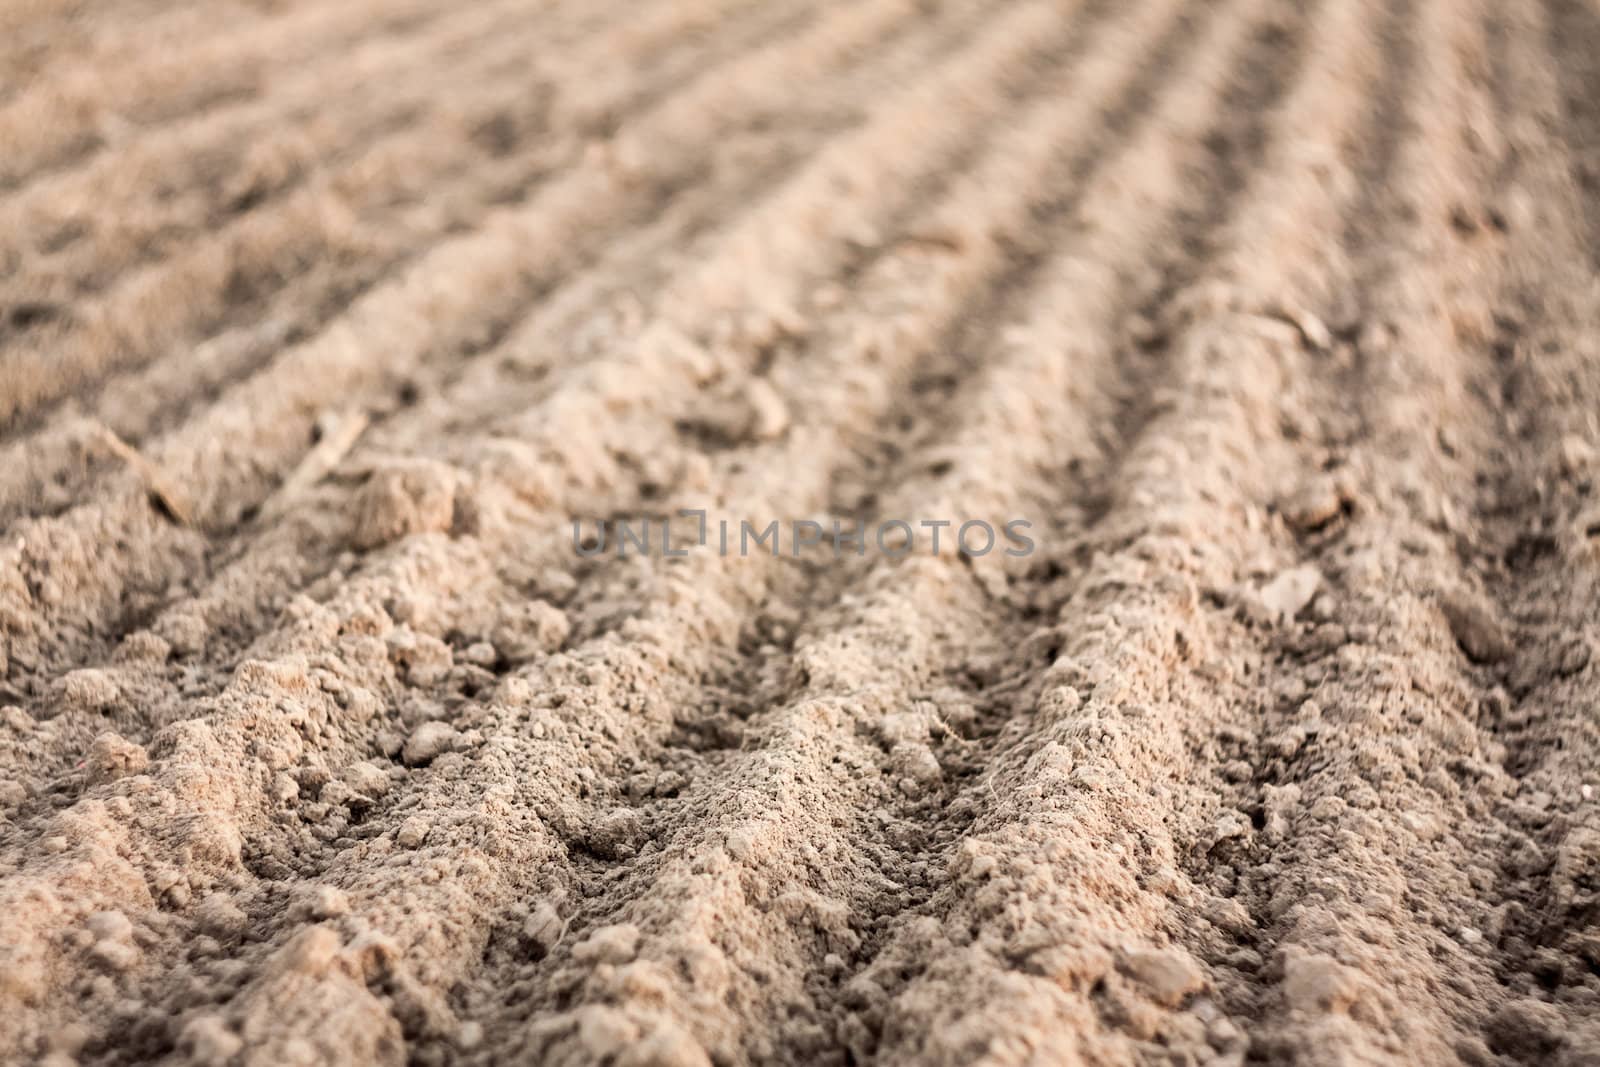 Background of newly plowed field ready for new crops. Ploughed field in autumn. Close focus farm, agricultural background